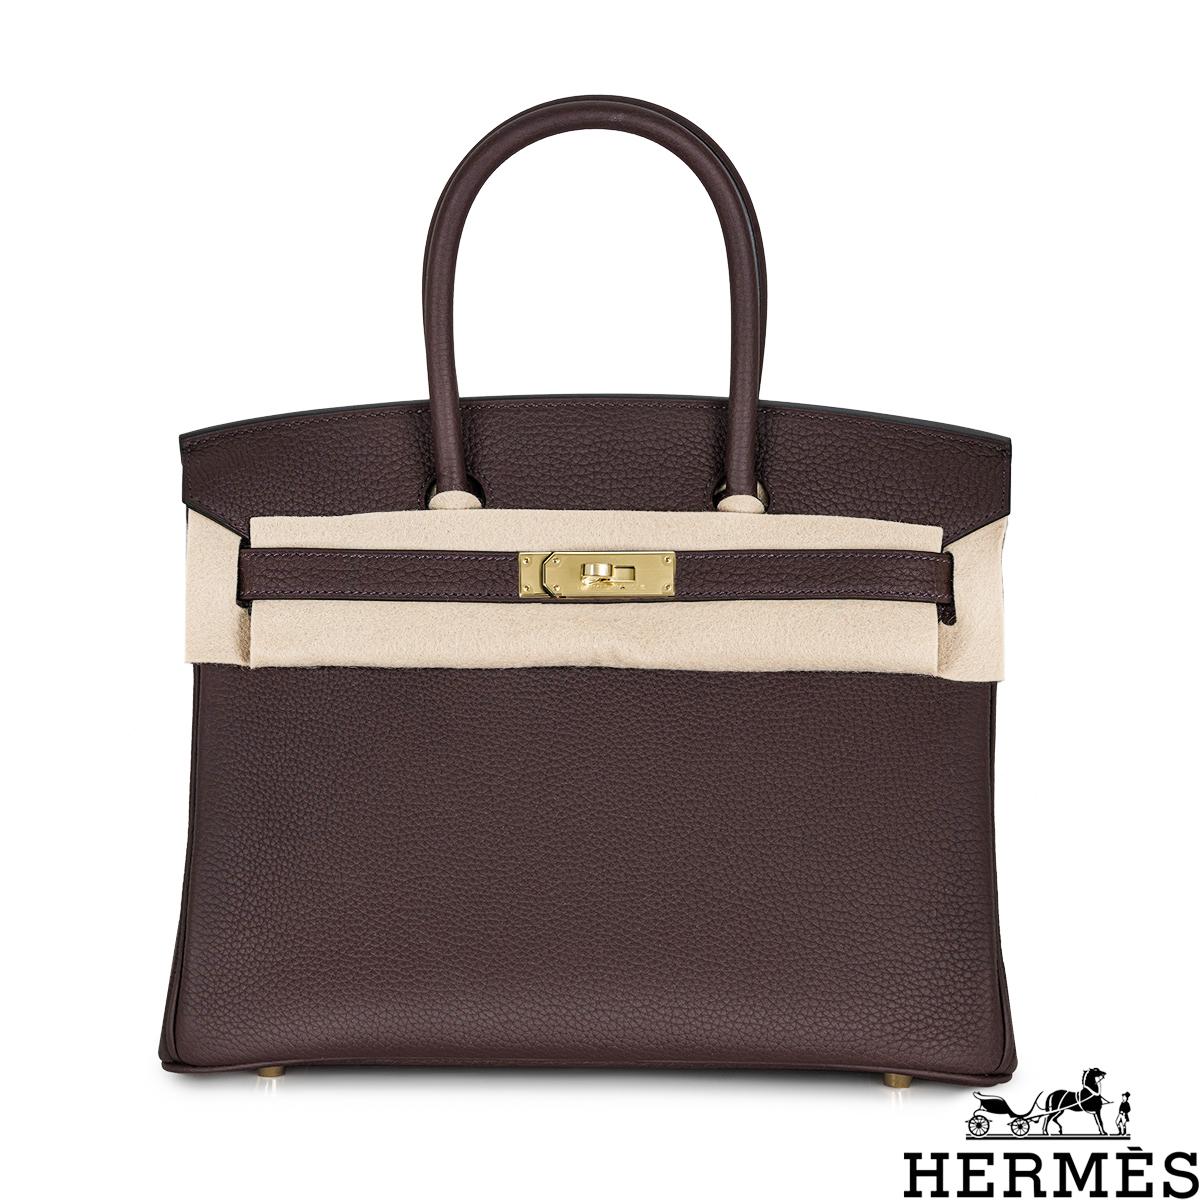 An amazing Hermès 30cm Birkin bag. The exterior of this Birkin is in Rogue Sellier Togo leather with tonal stitching. It features gold tone hardware with two straps and a front toggle closure. The interior features a zip pocket with an Hermès